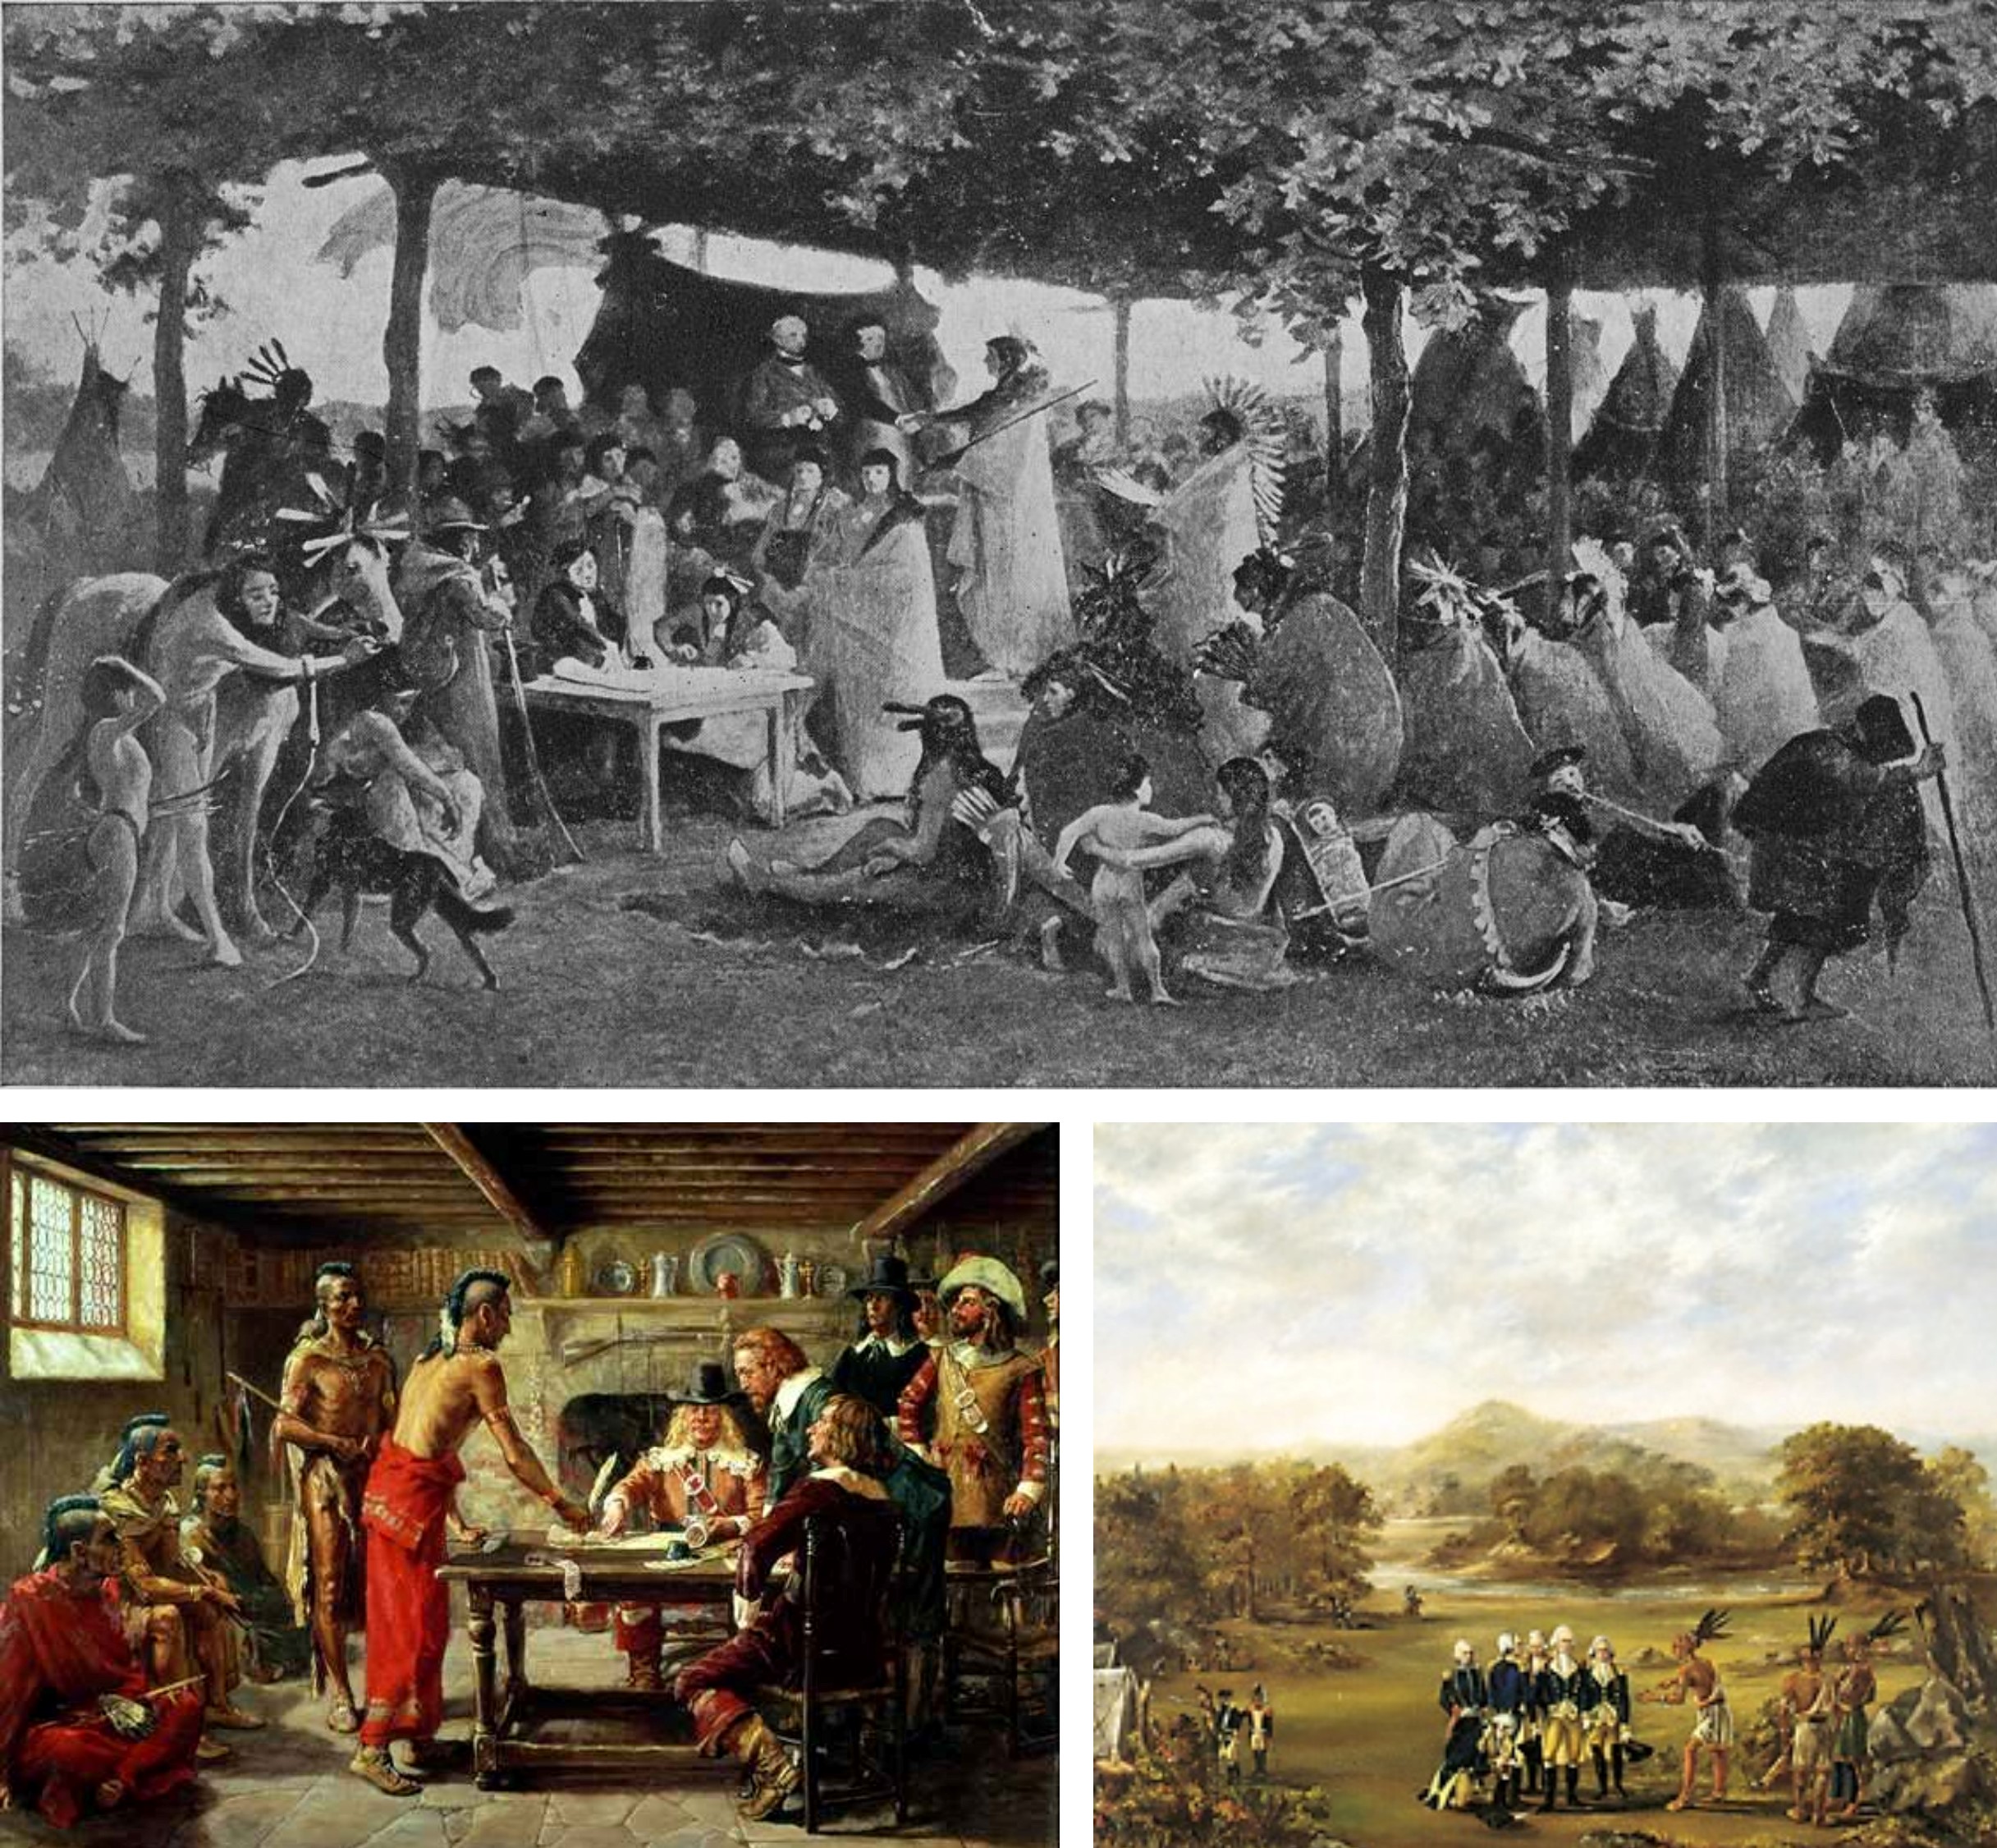 On the top, the signing of a treaty in 1851 between the U.S. and the Sioux Indian bands. On the bottom left, signing of a peace treaty in 1642 in New Amsterdam. On the bottom right, the United States and a coalition of Native American tribes signing the Treaty of Greenville.